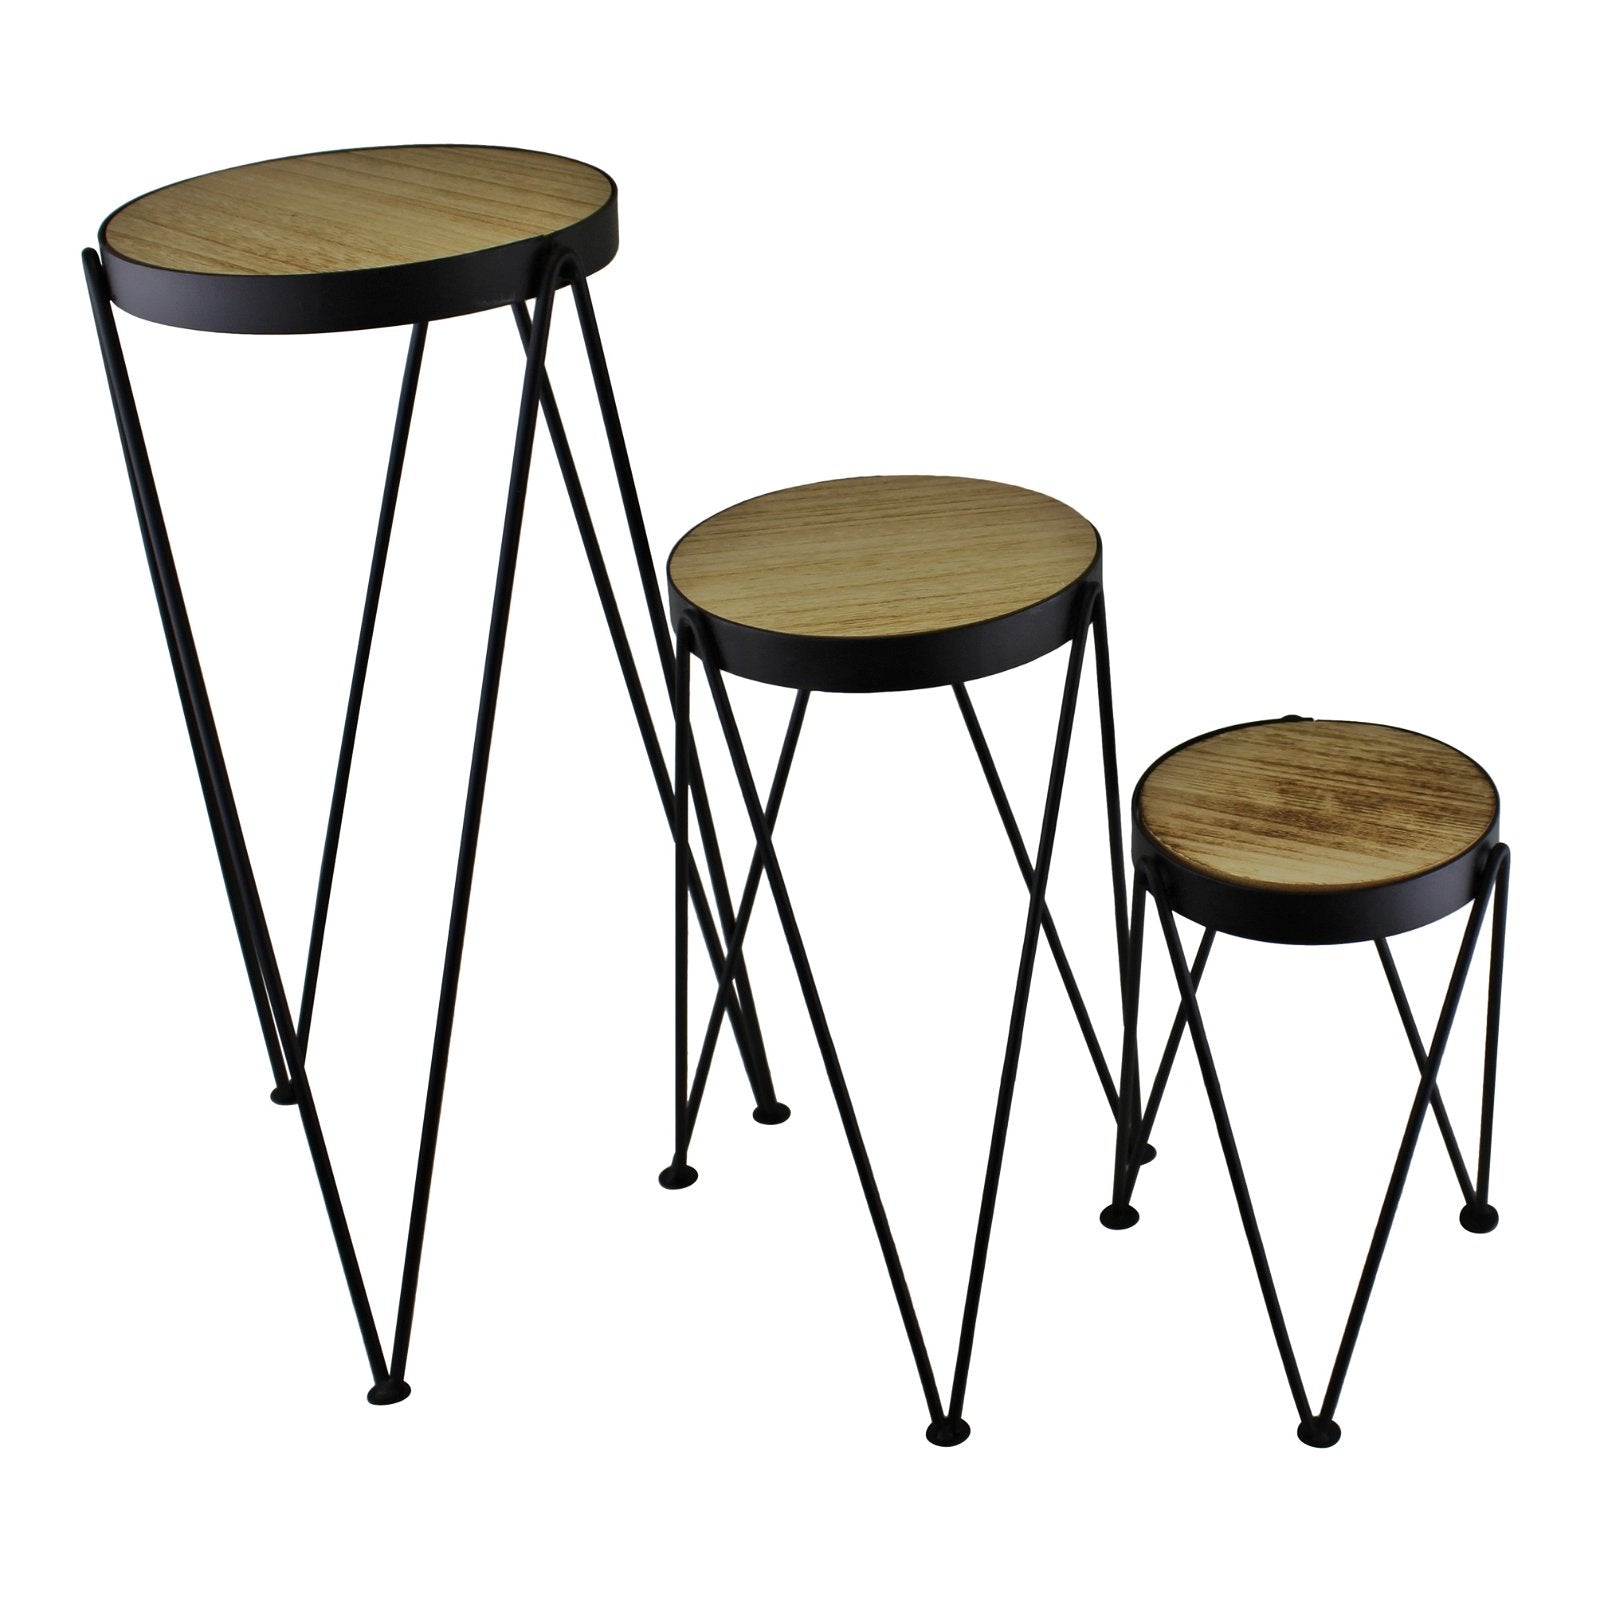 View Set of 3 Black Metal and Wood Effect Plant Stands information